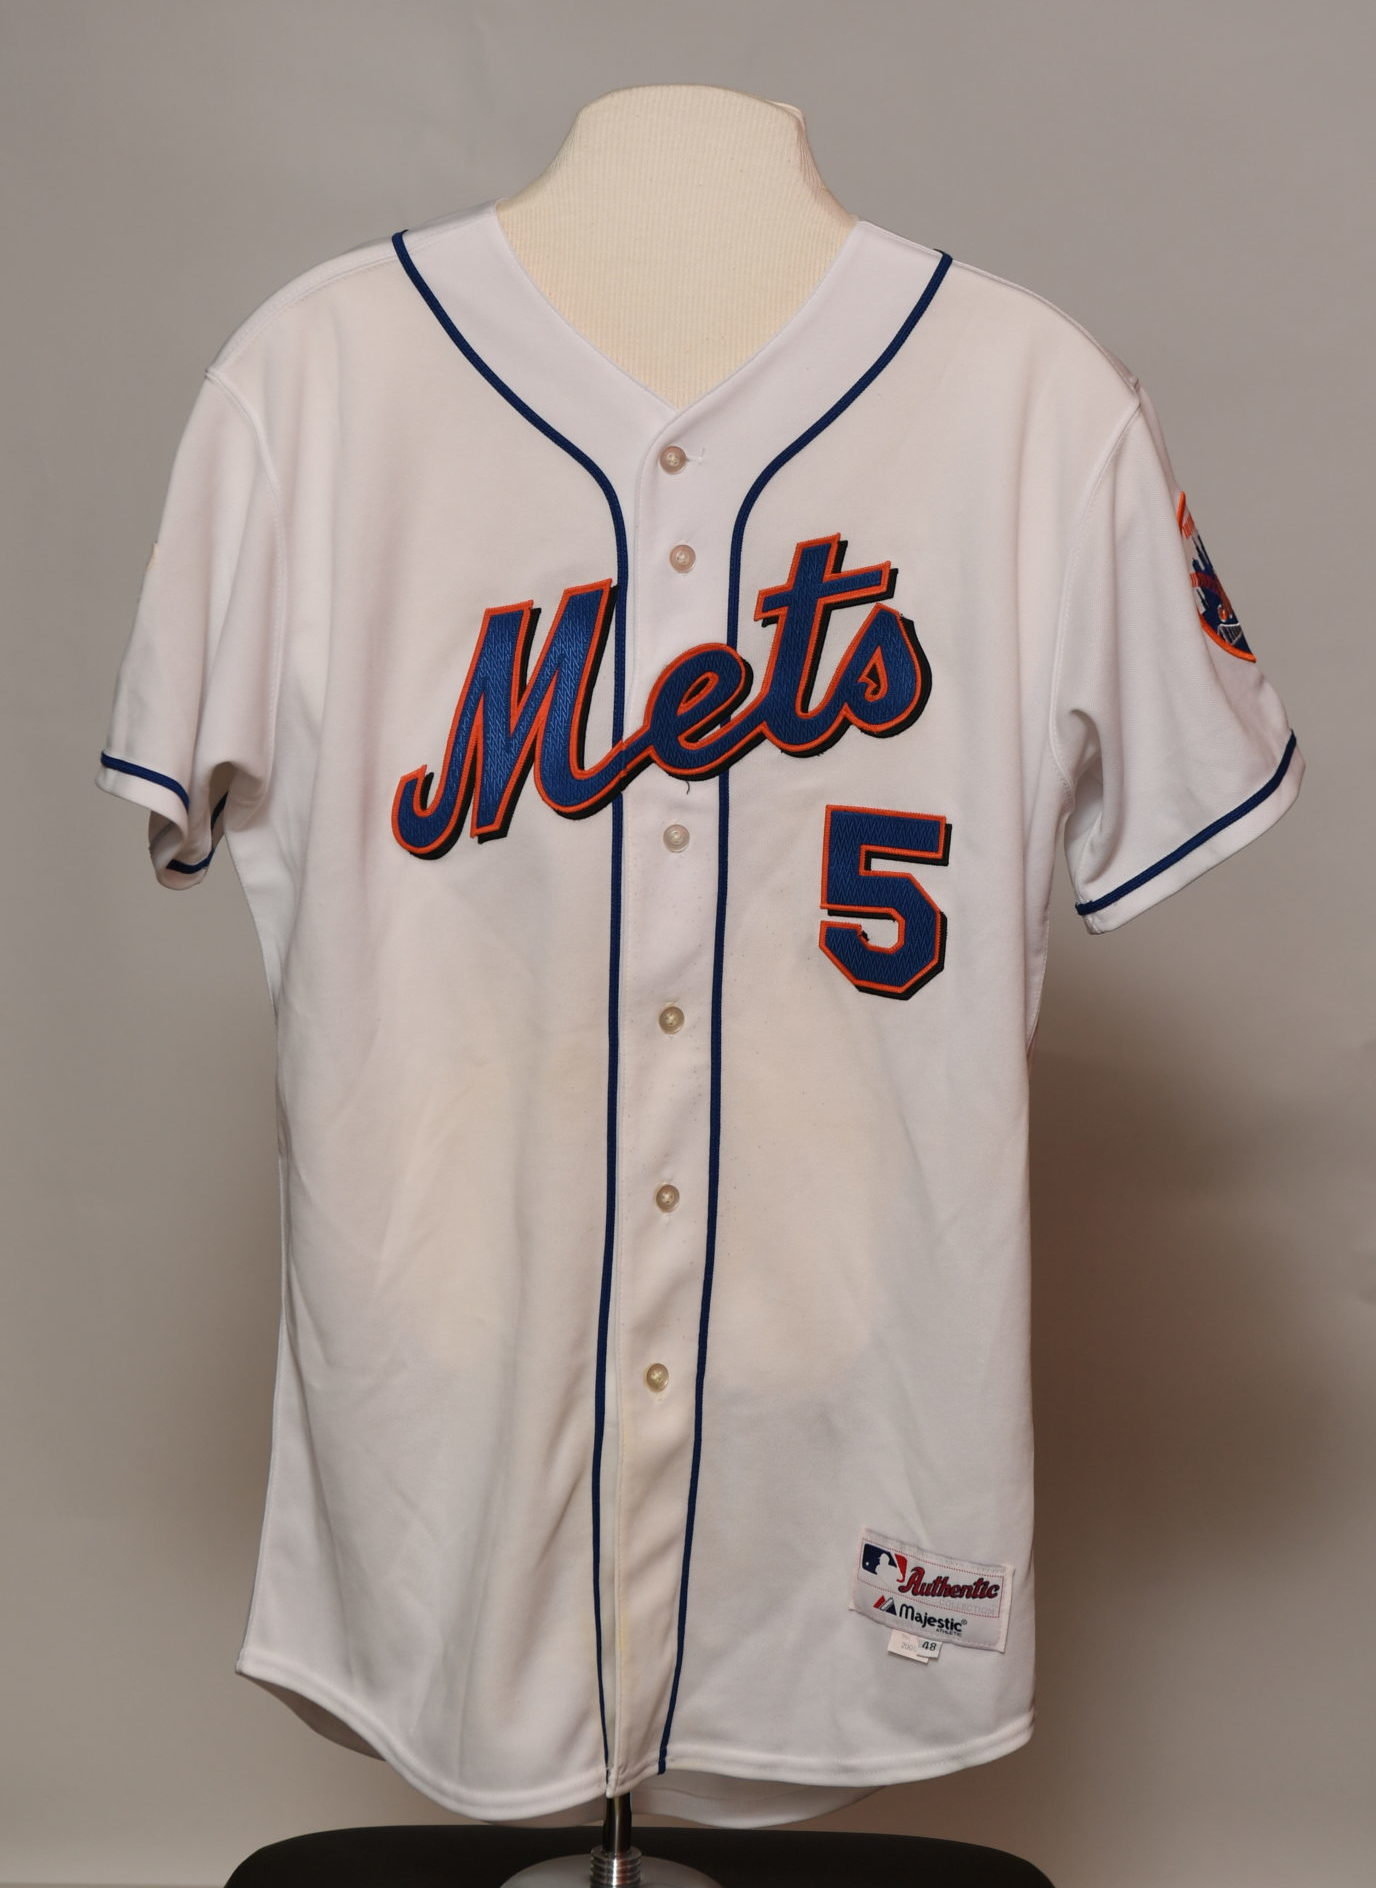 David Wright's First All-Star Game Jersey - Mets History